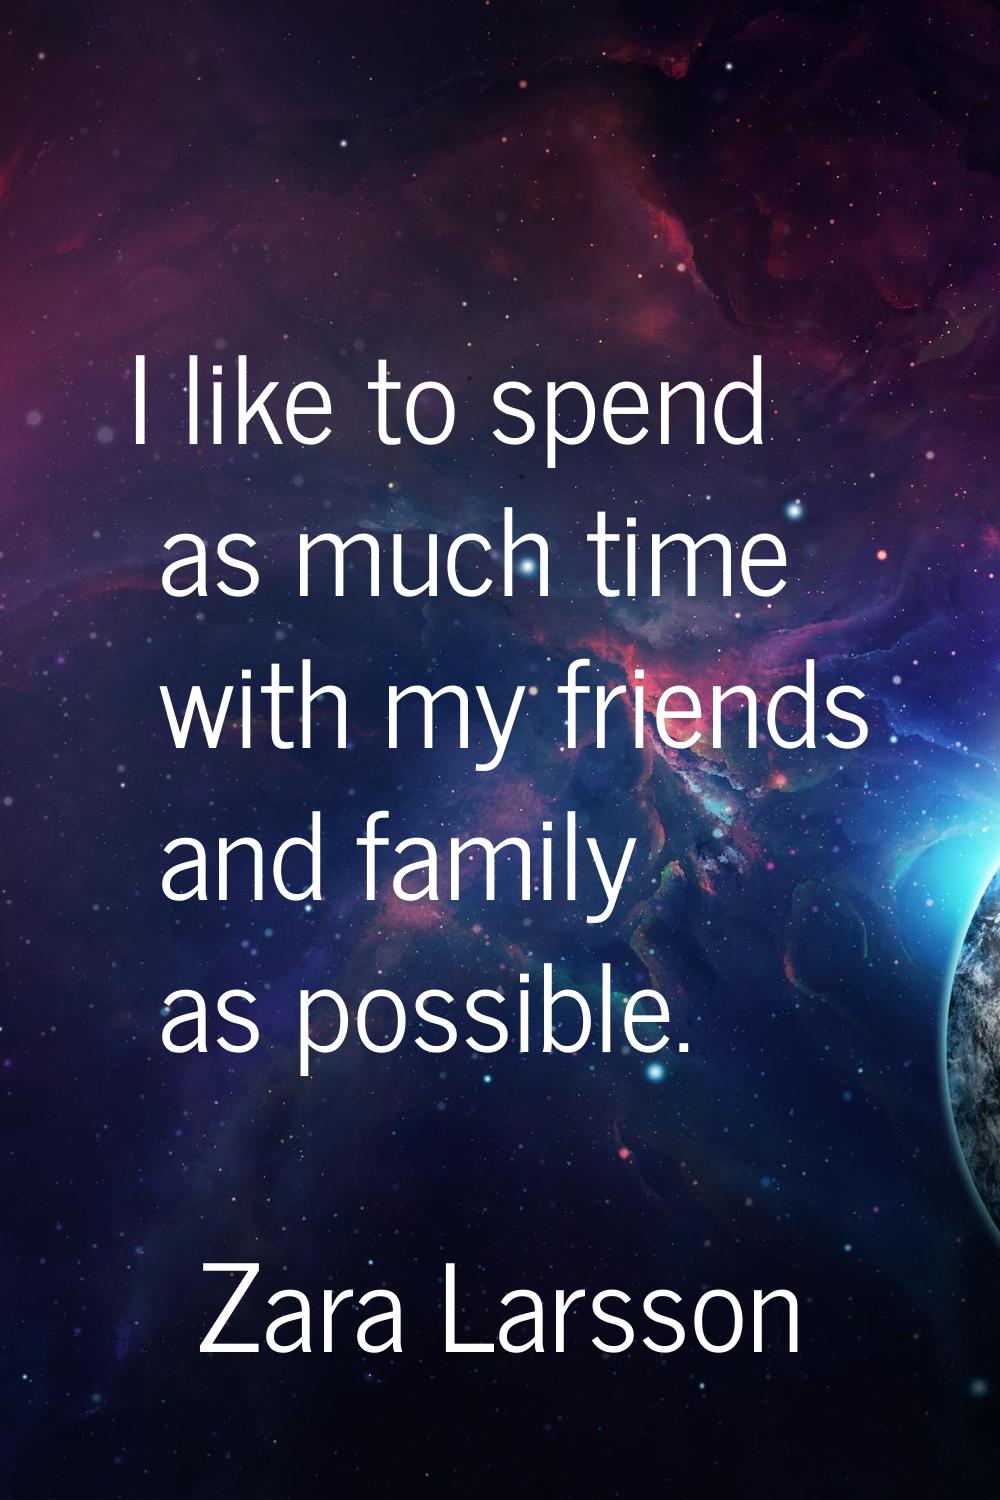 I like to spend as much time with my friends and family as possible.